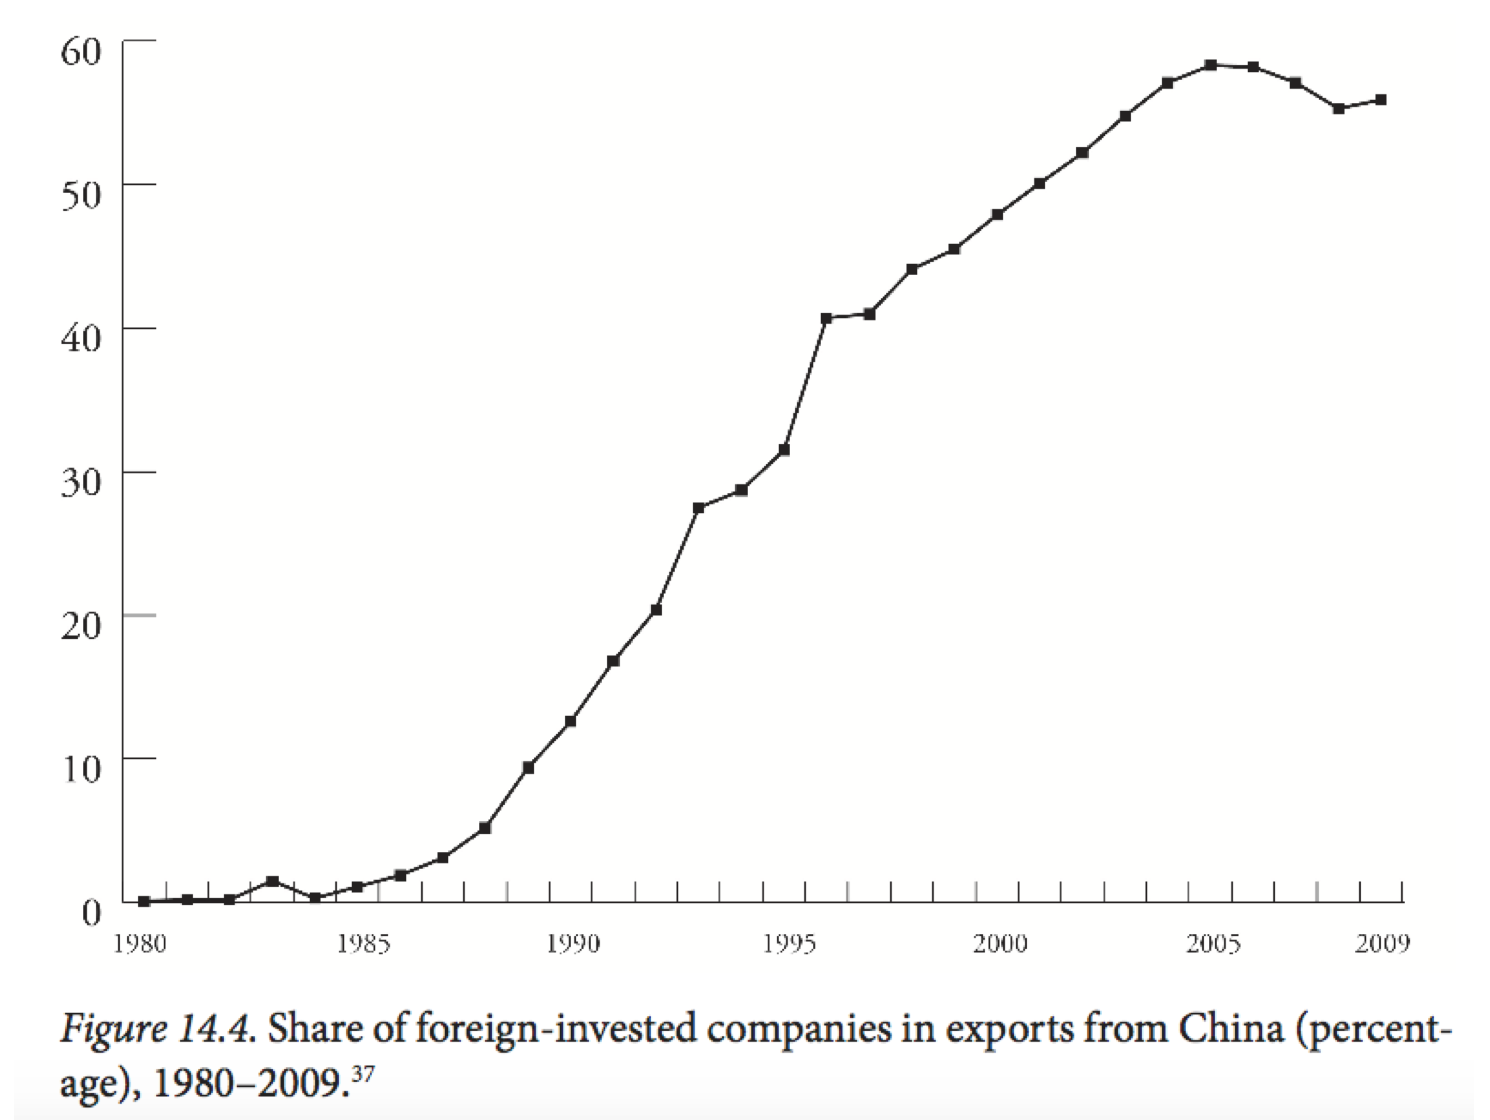 Data from Investment Promotion Agency, China’s Ministry of Commerce, in Tang et al., ‘Foreign’, 35.